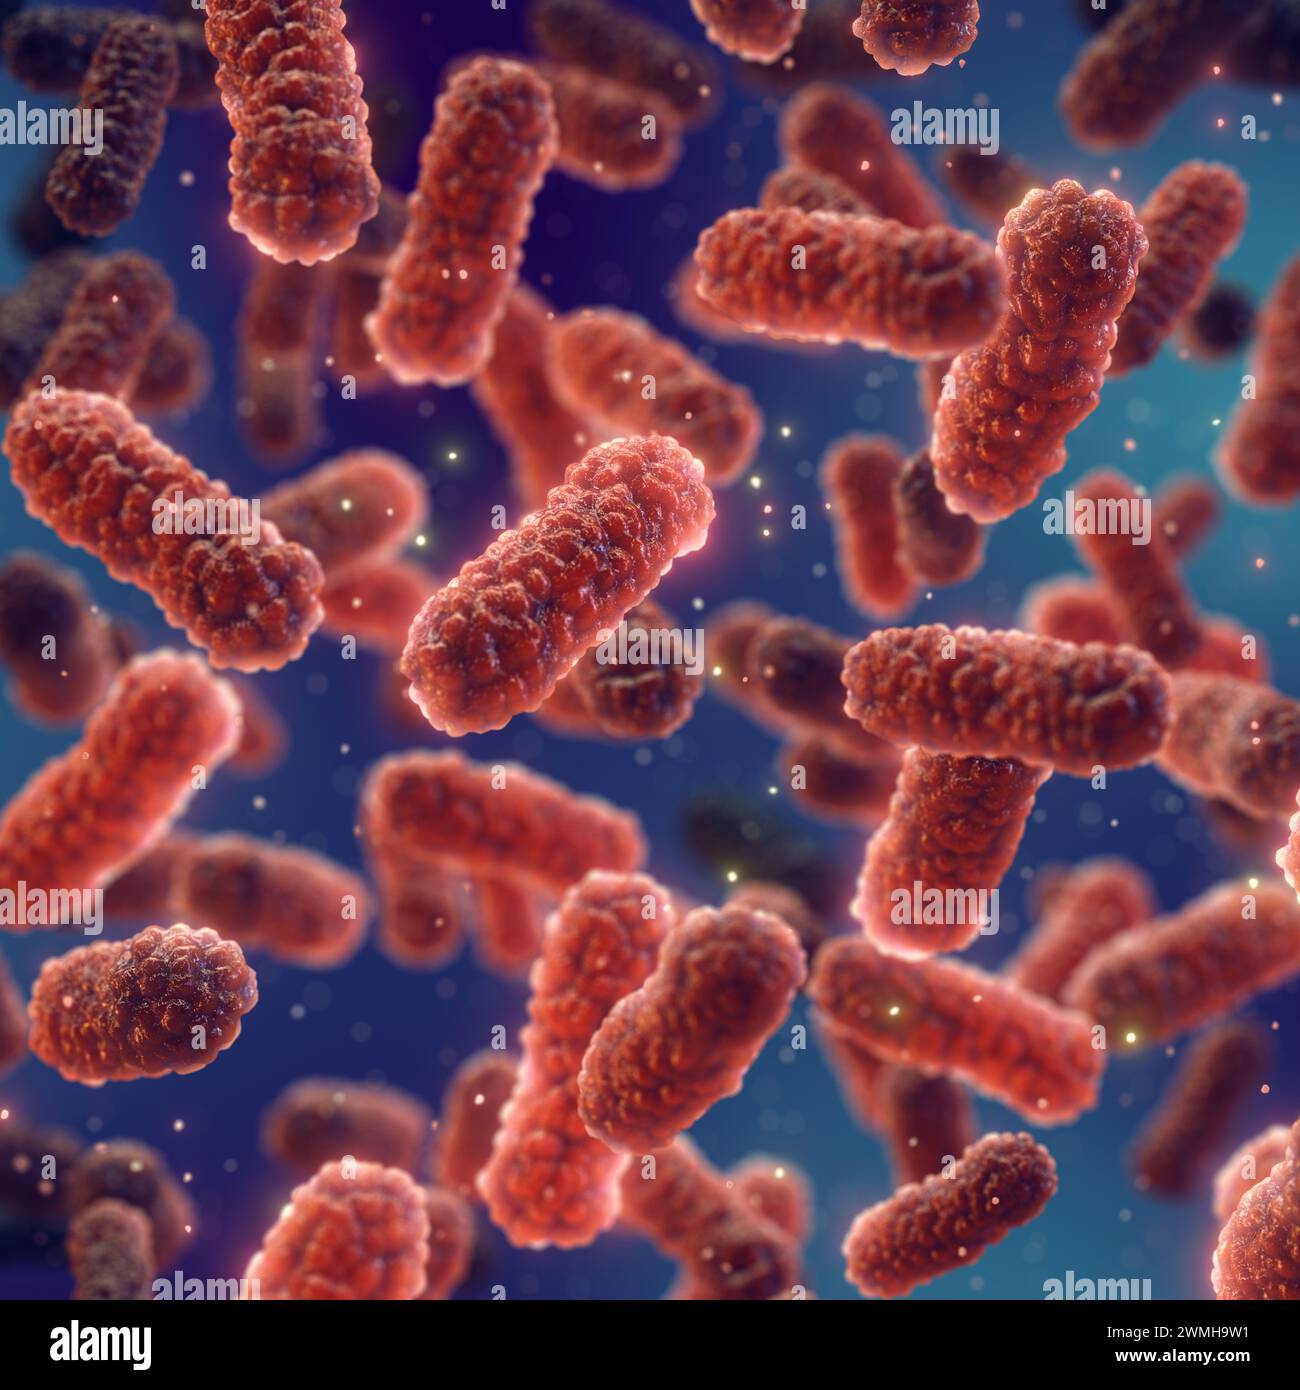 Antibiotic use is leading to decreased immunity and bacterial superinfection. Drug resistant bacteria. Red pathogenic bacteria on dark background Stock Photo